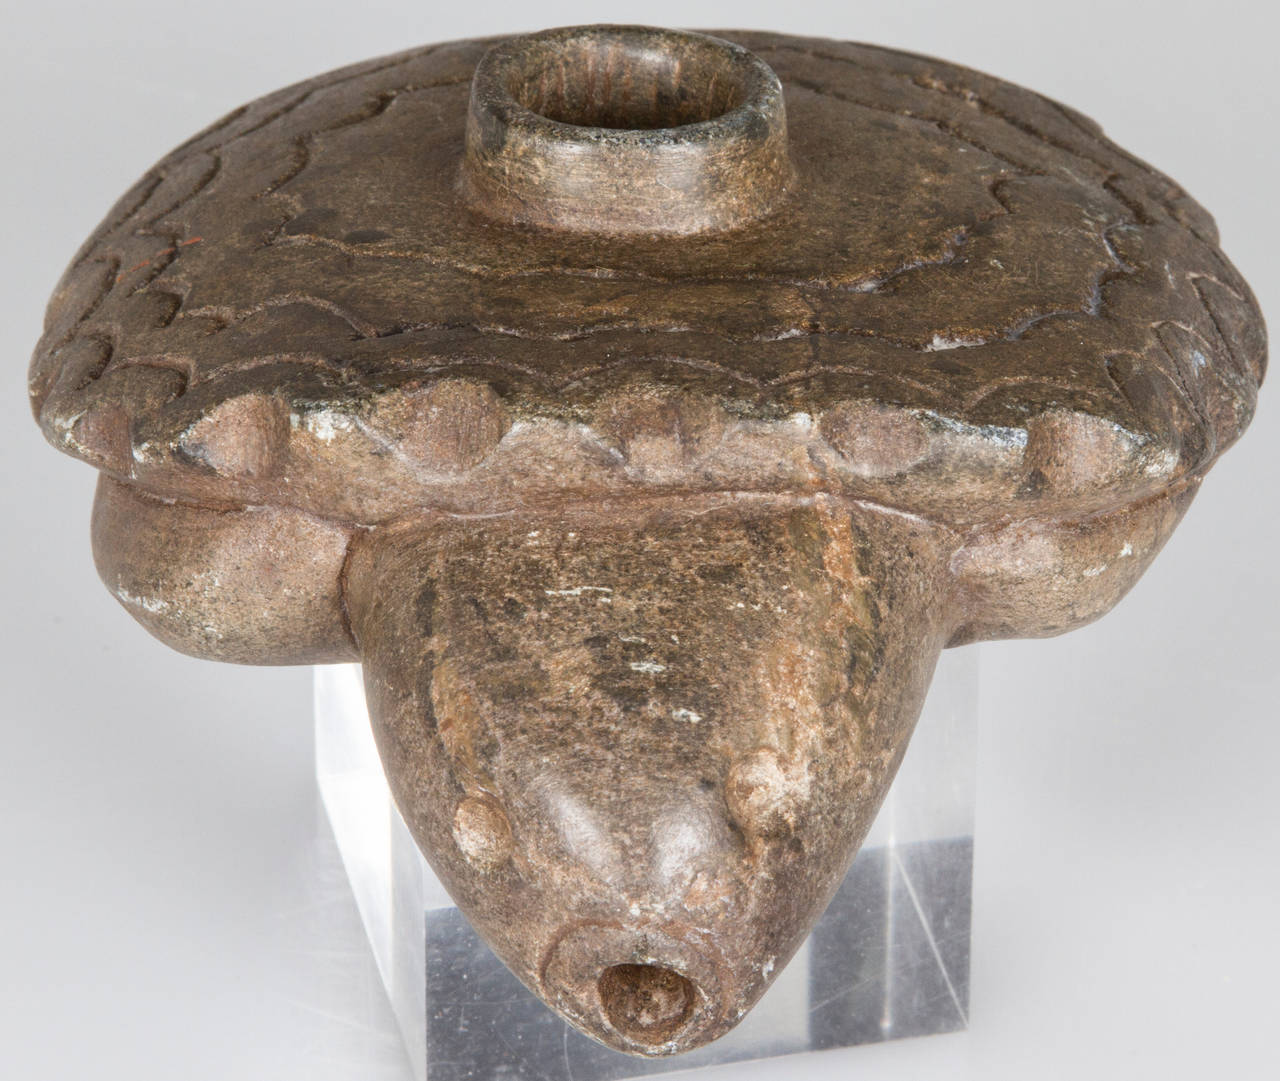 This hand-carved stone pipe has the bowl on the top of the turtles shell with another hole bored through his mouth.